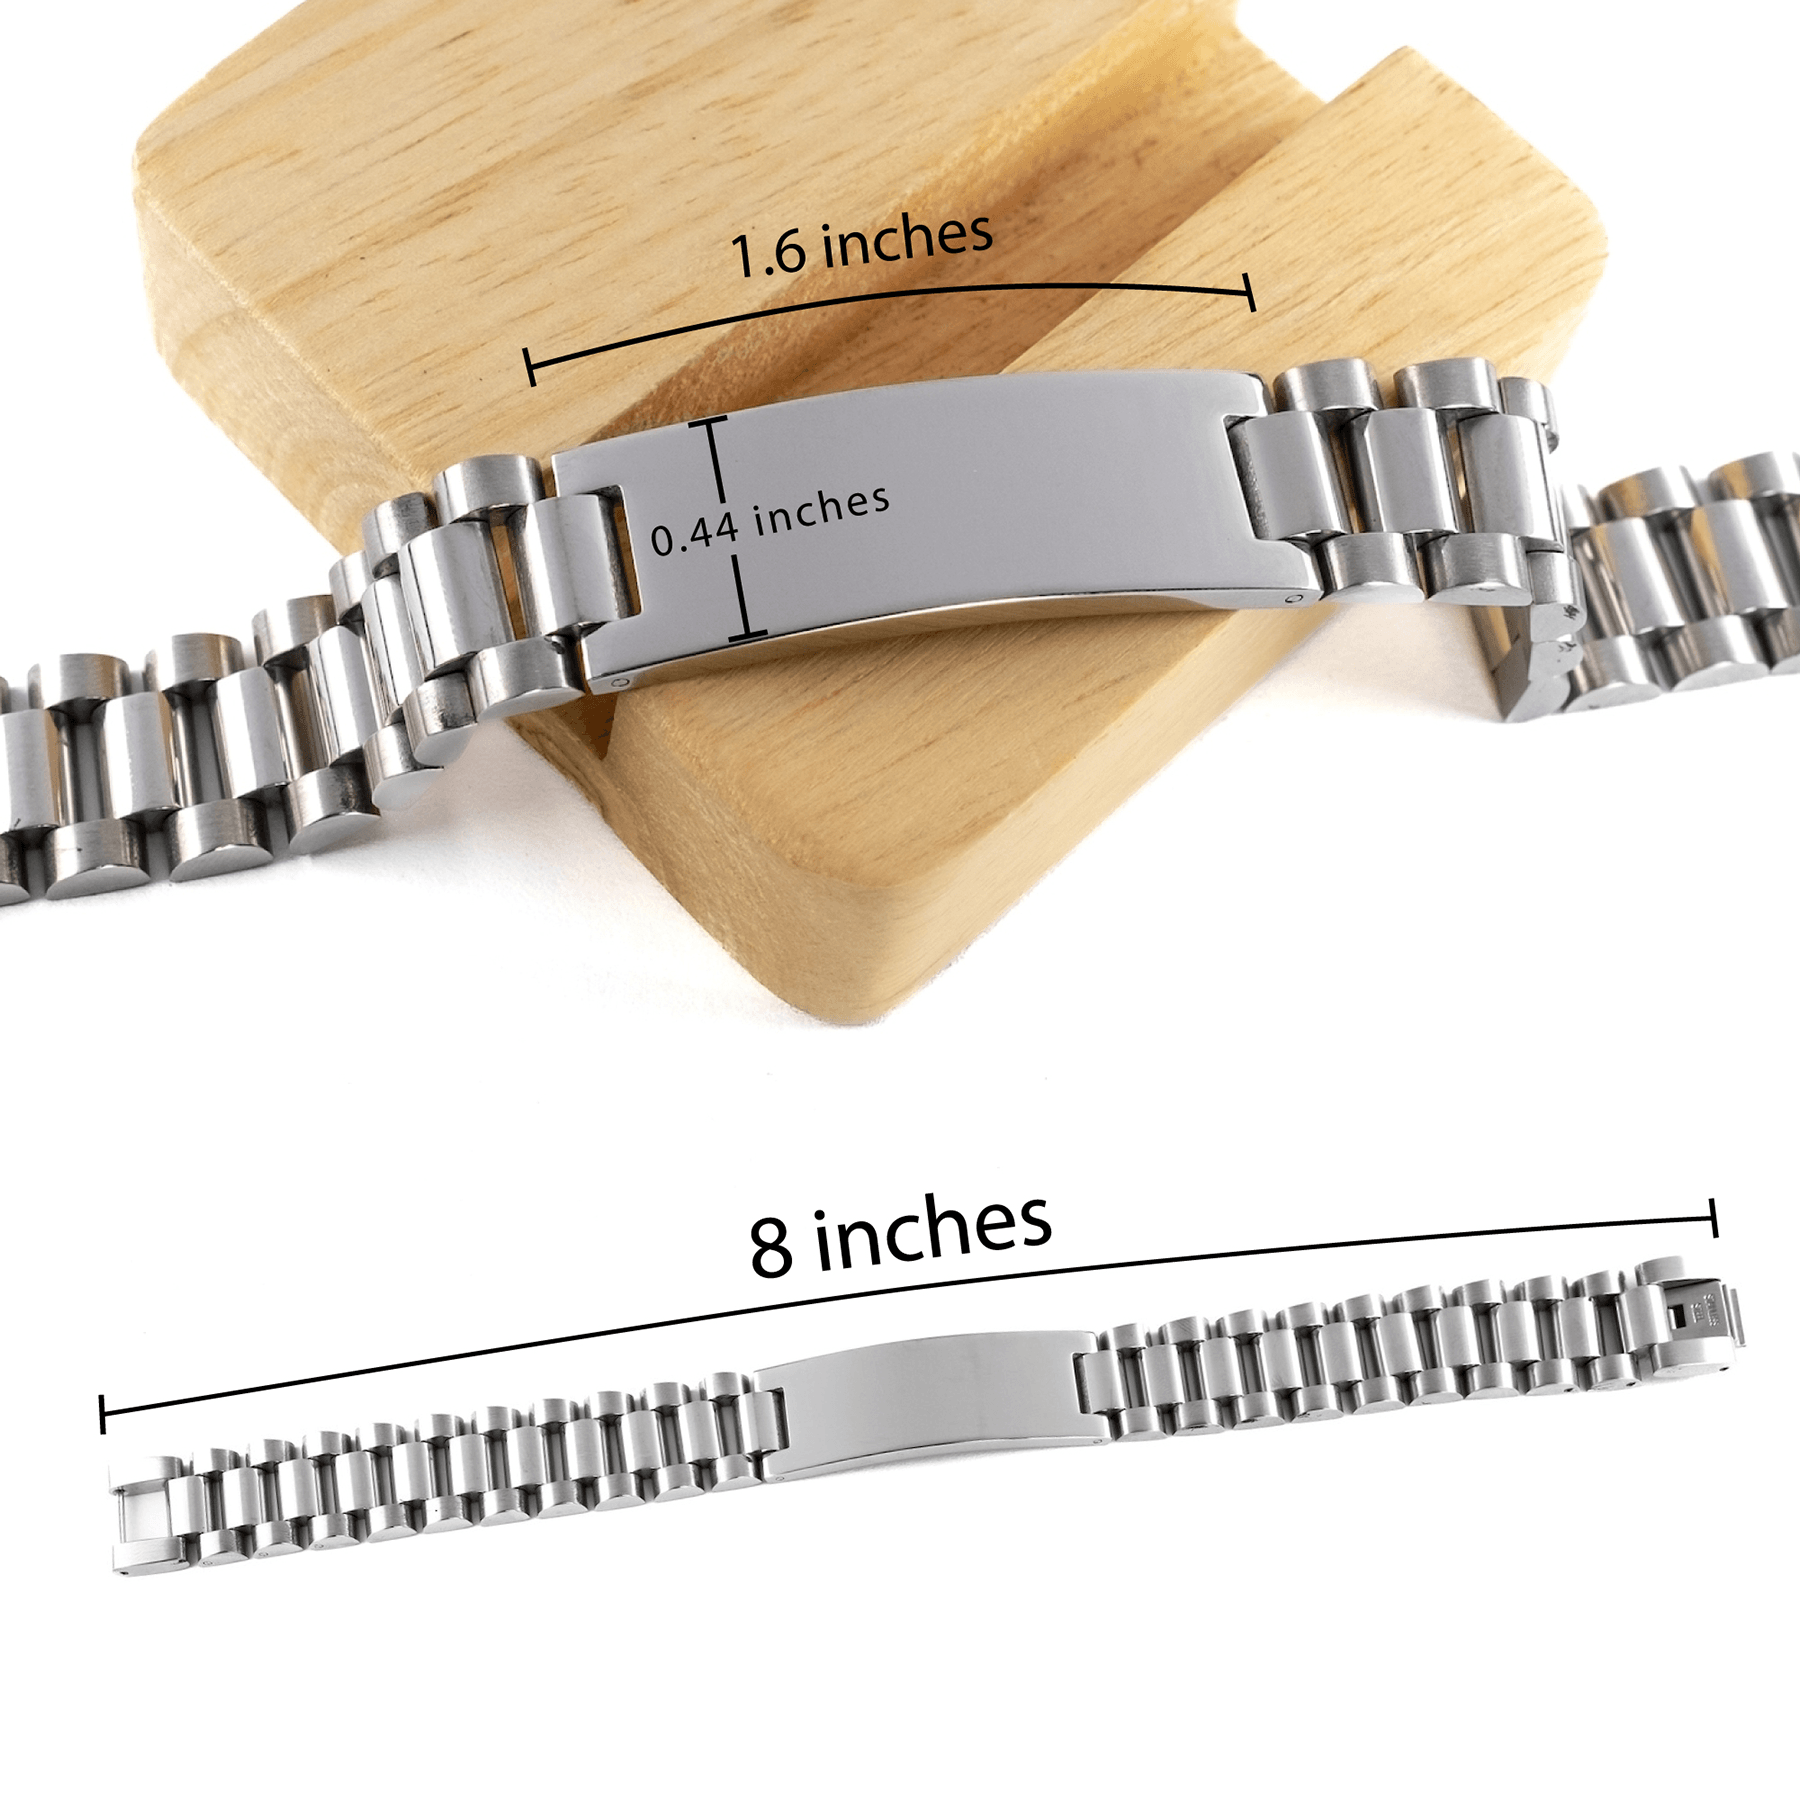 Stepdad Ladder Stainless Steel Bracelet Birthday Christmas Unique Gifts Behind you, all your memories, before you, all your dreams - Mallard Moon Gift Shop